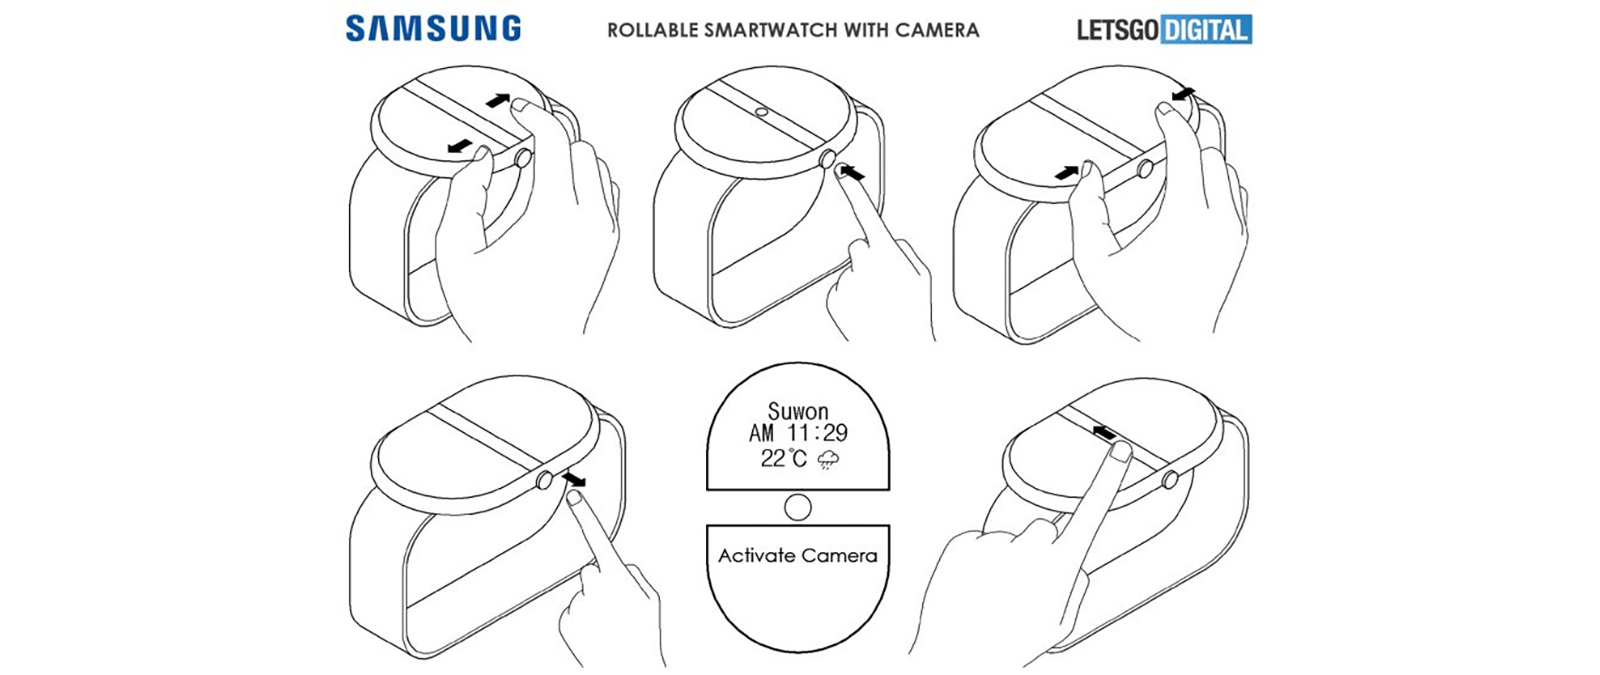 A Samsung smartwatch patent showing a watch with an extending display.